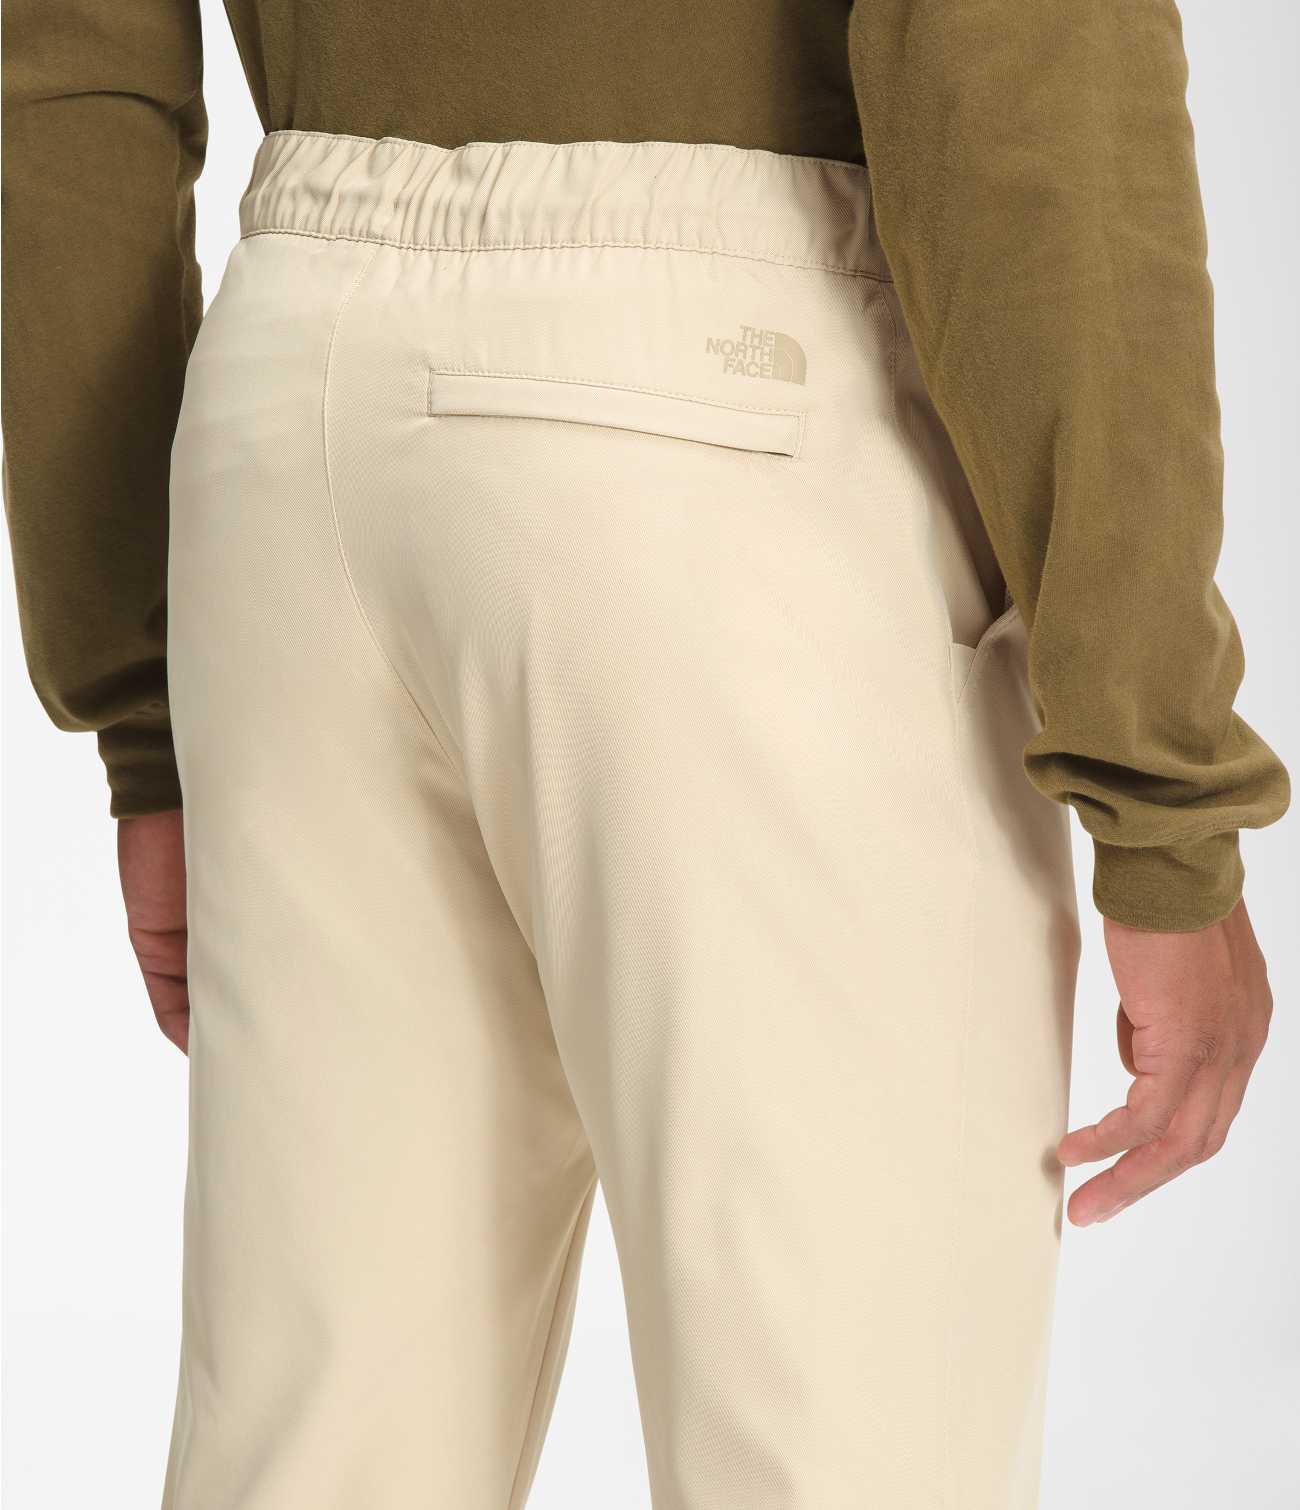 M STANDARD TAPERED PANT - AP - The North Face